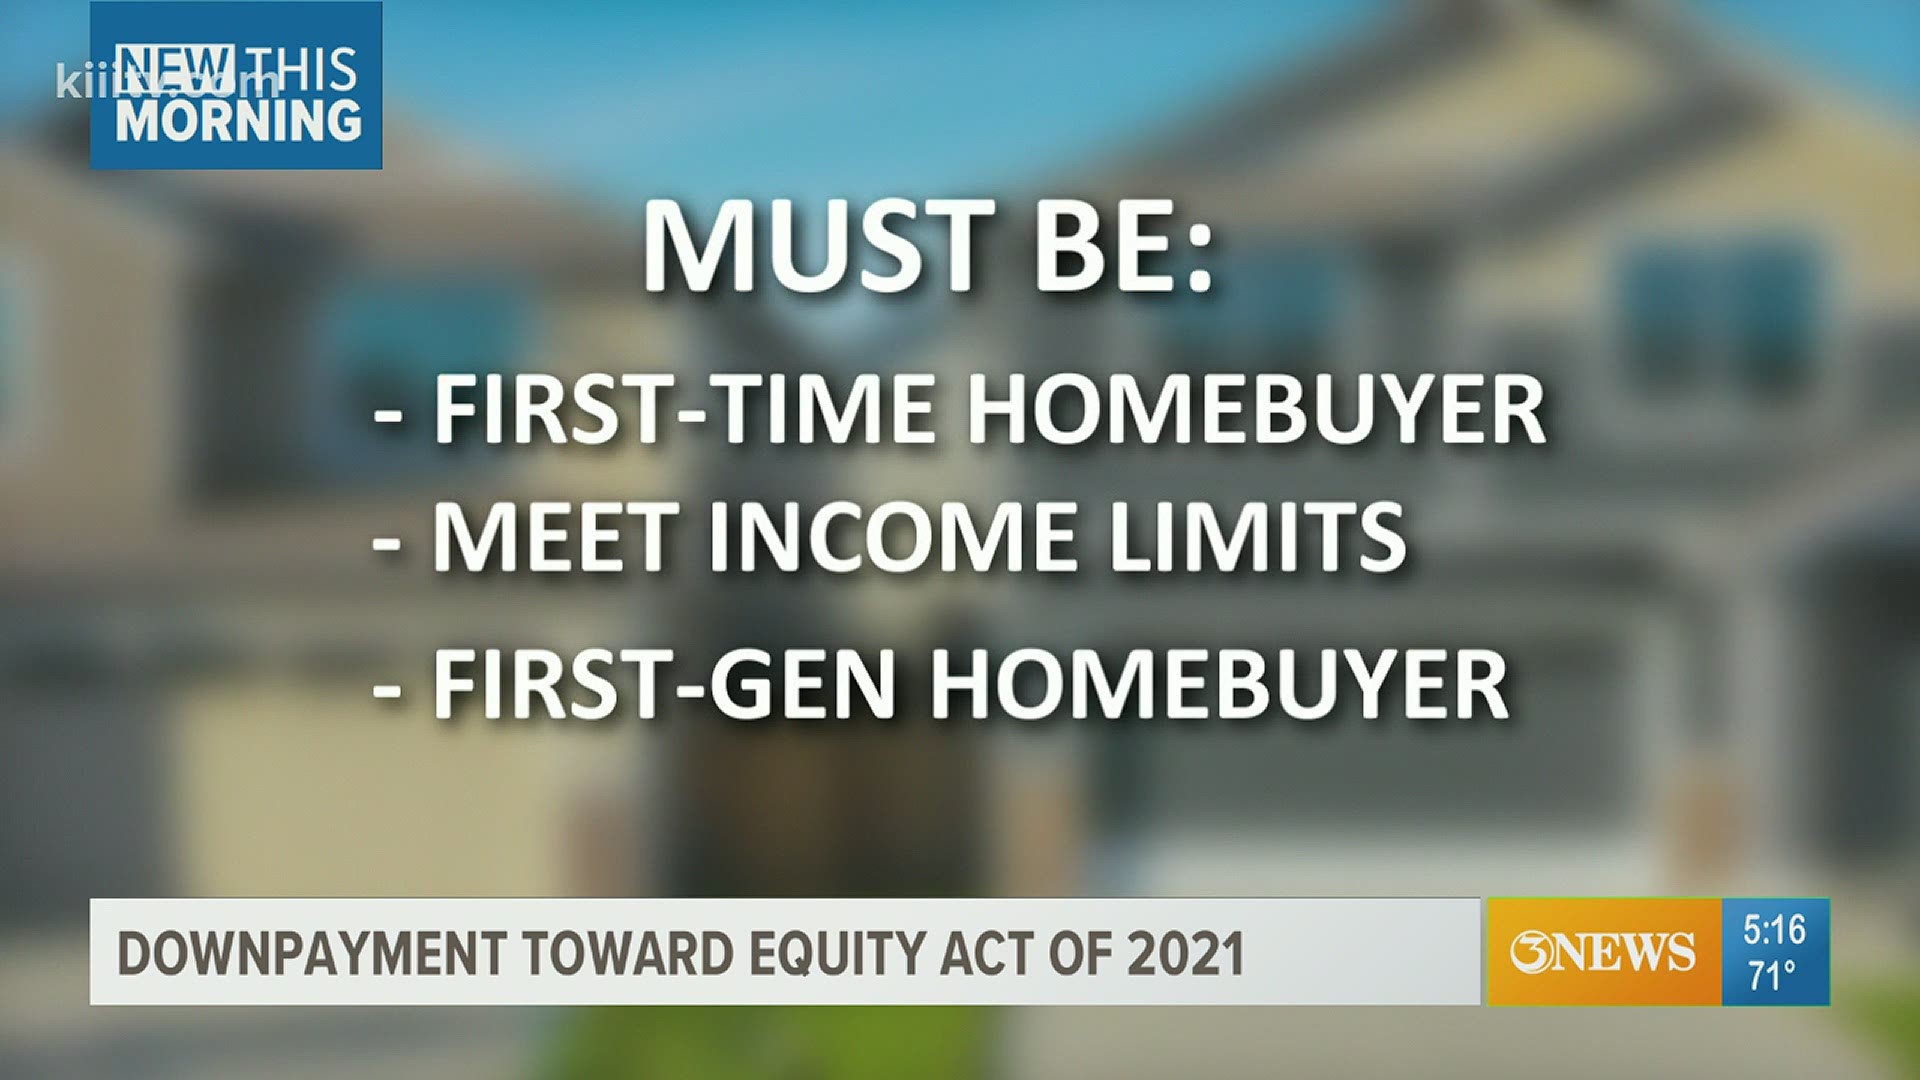 The Downpayment Toward Equity Act of 2021 would provide up to $25,000 to those who qualify, if it passes.